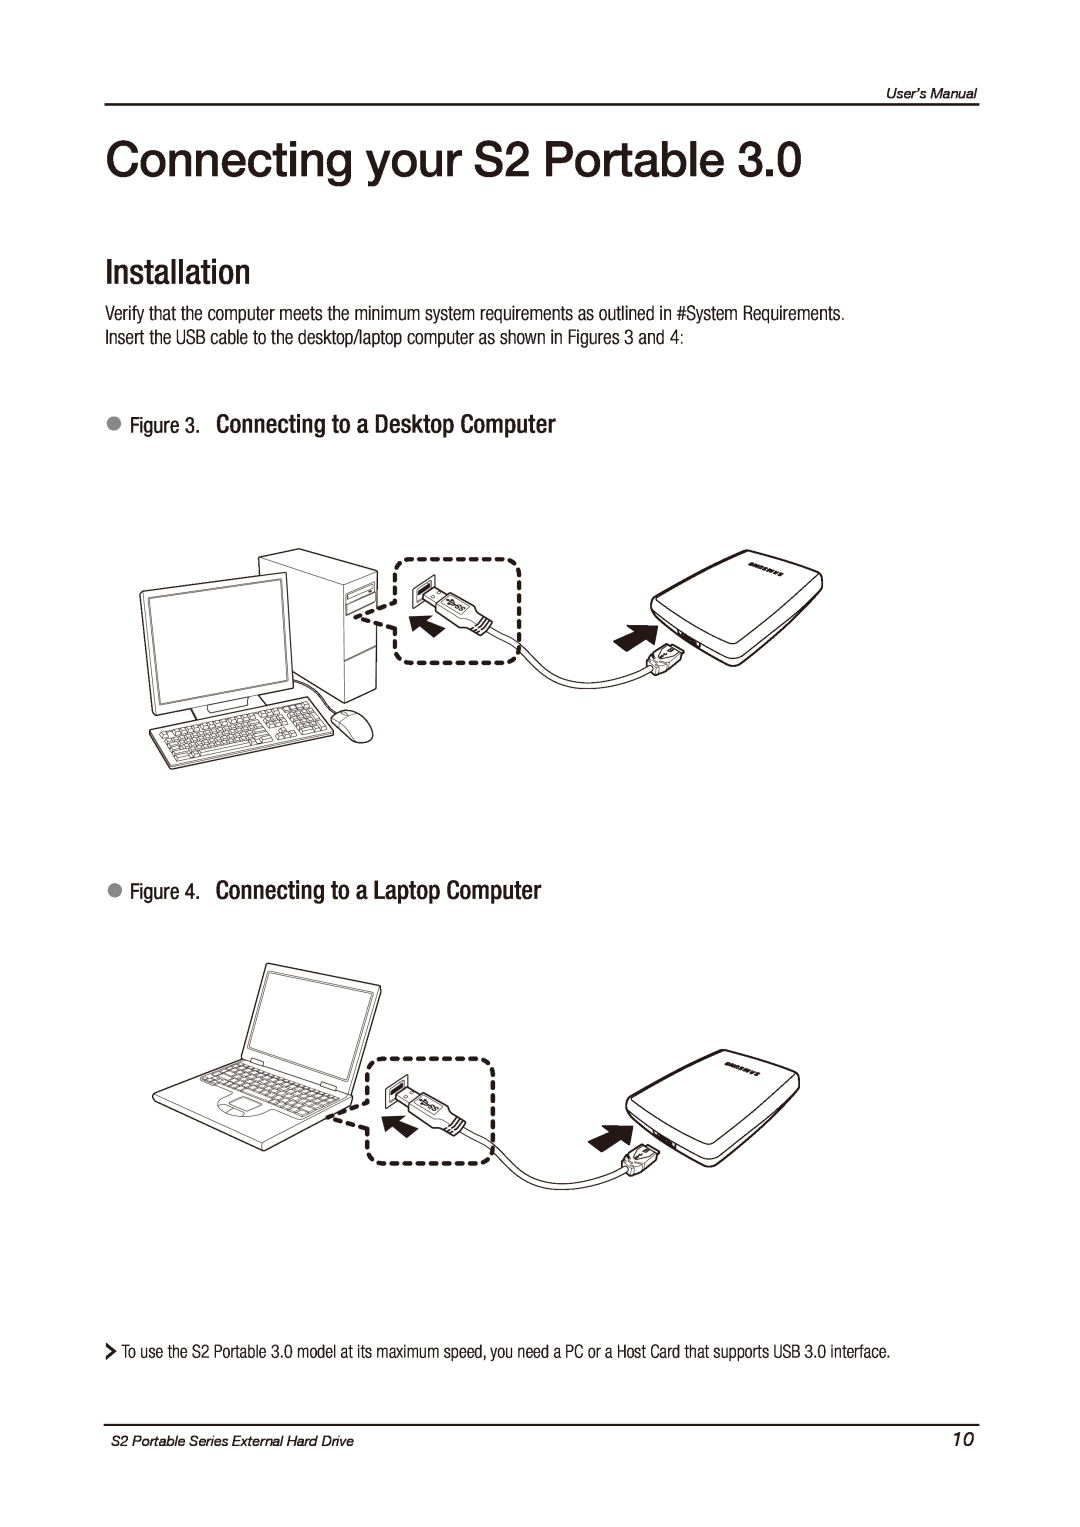 Samsung HXMU016DA user manual Connecting your S2 Portable, Installation, Connecting to a Desktop Computer, User’s Manual 